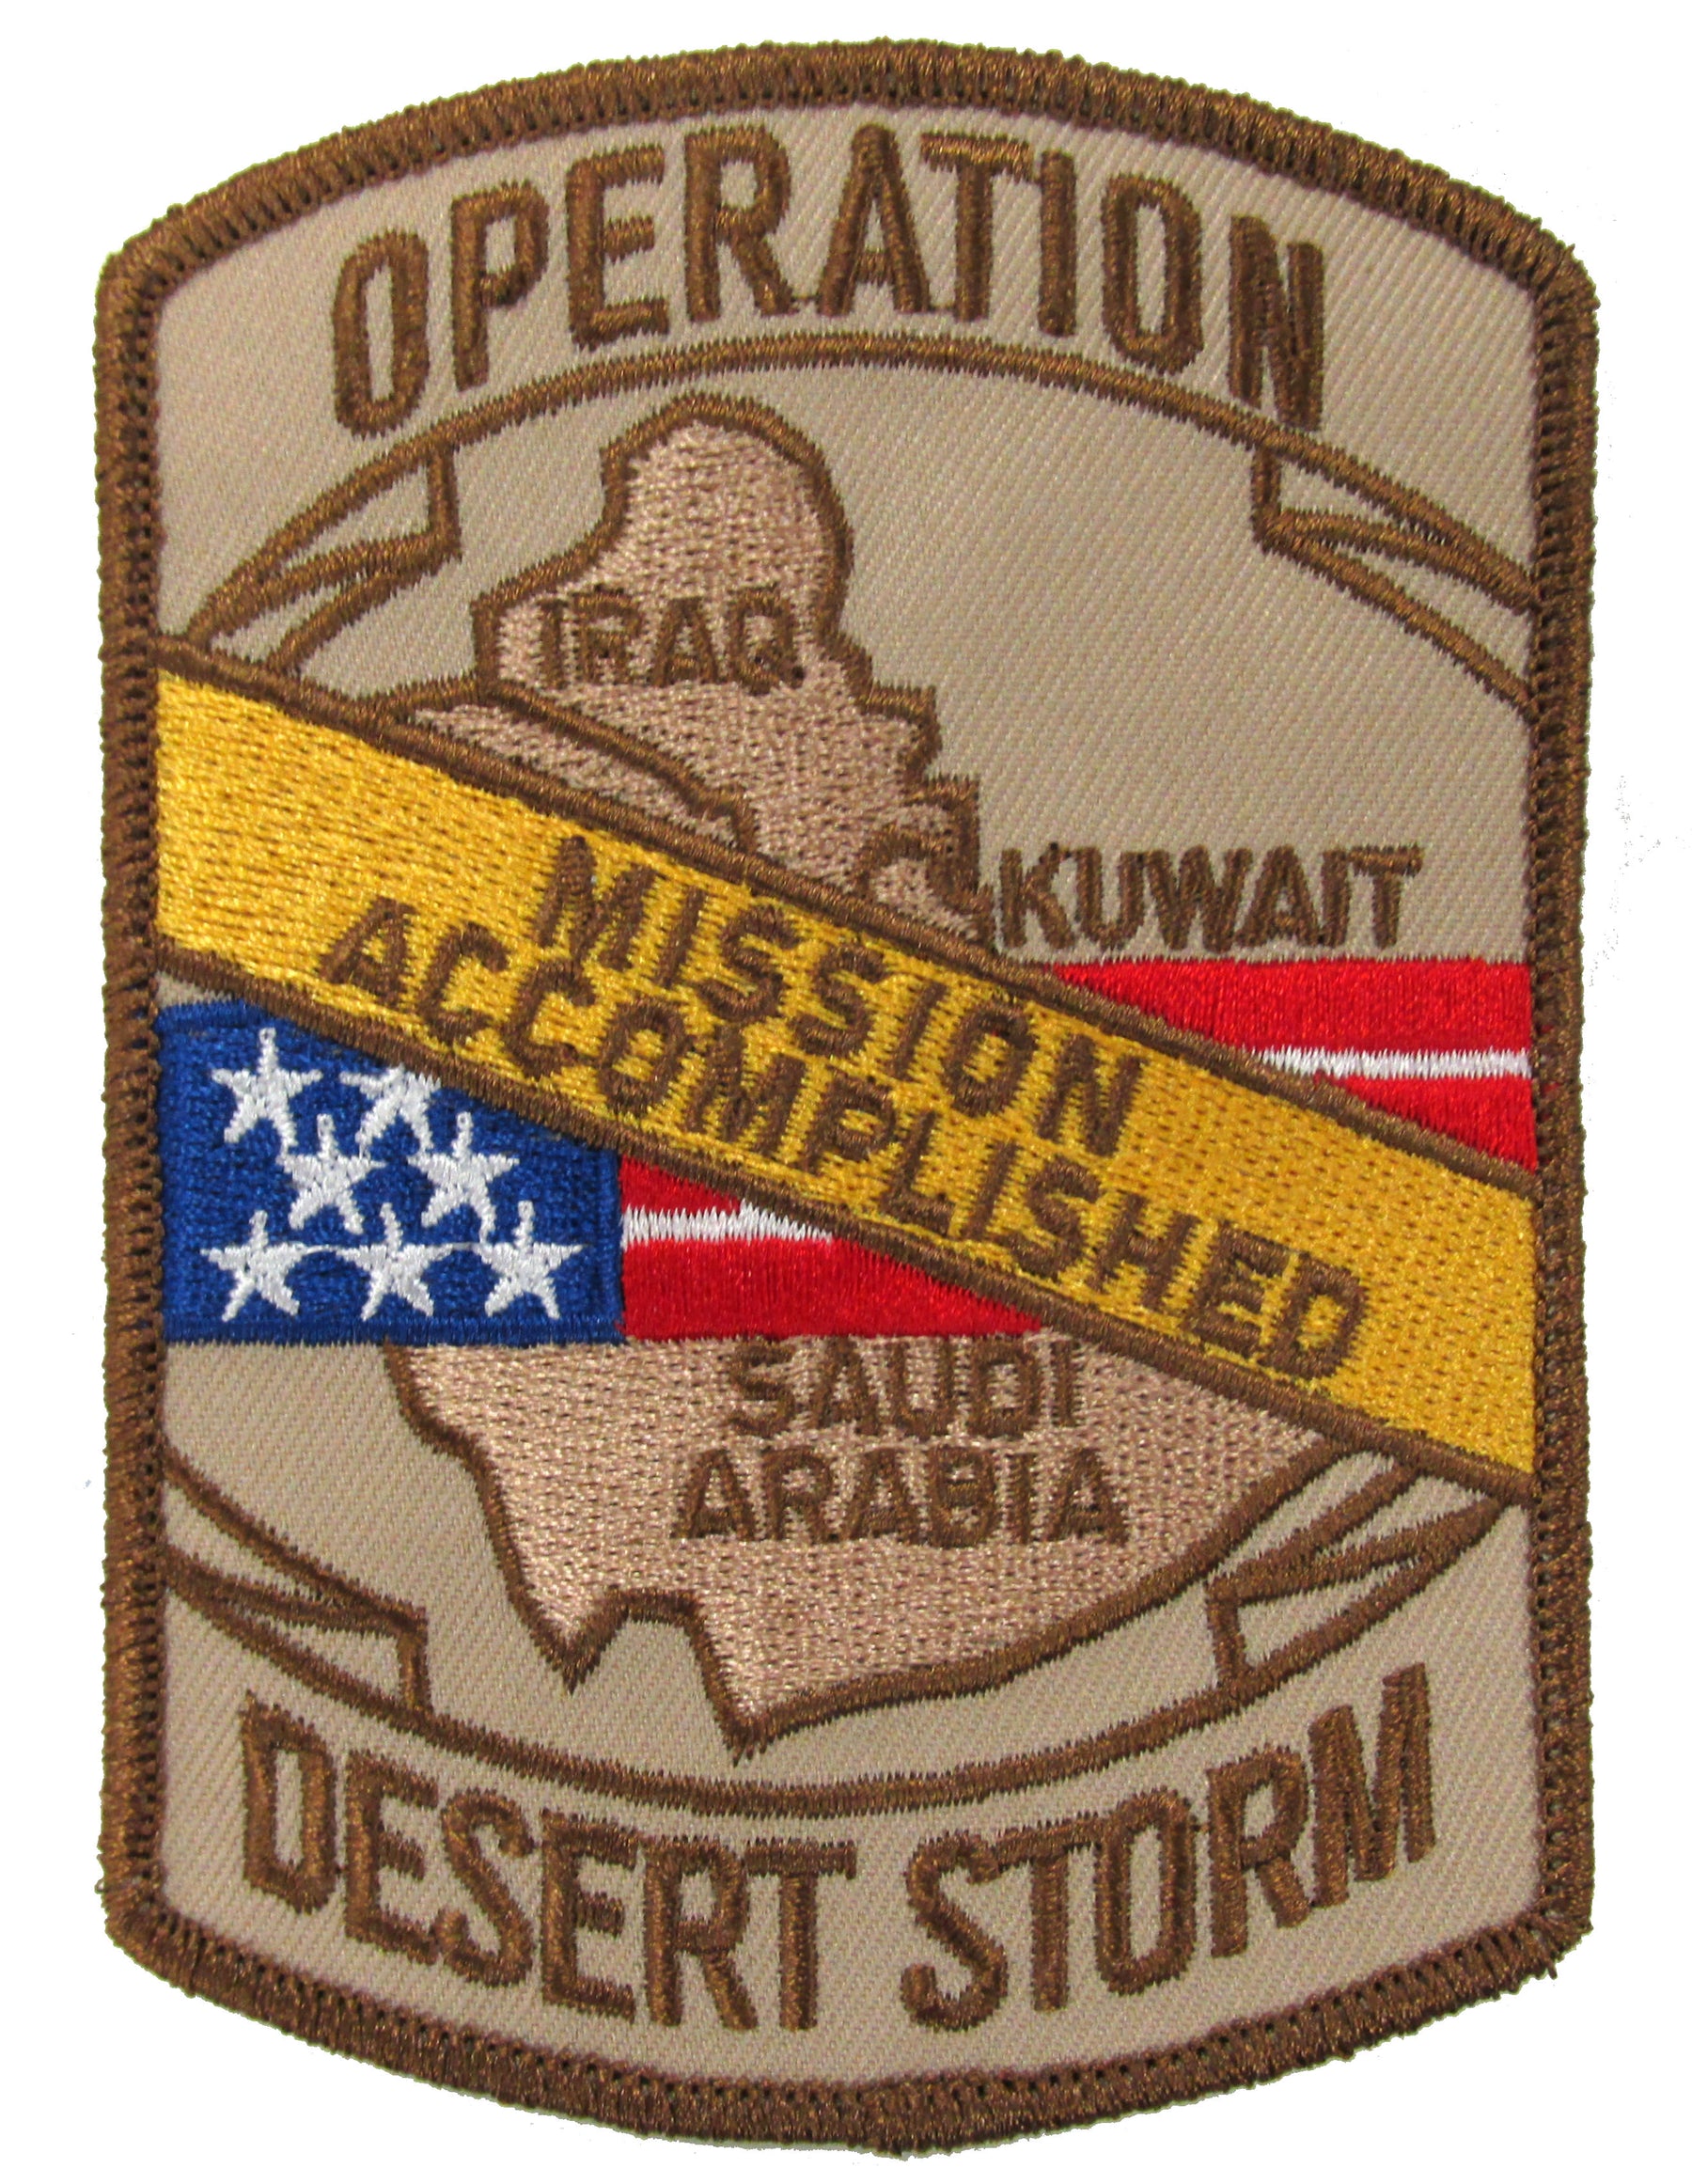 Missioned Accomplished - Operation Desert Storm Patch